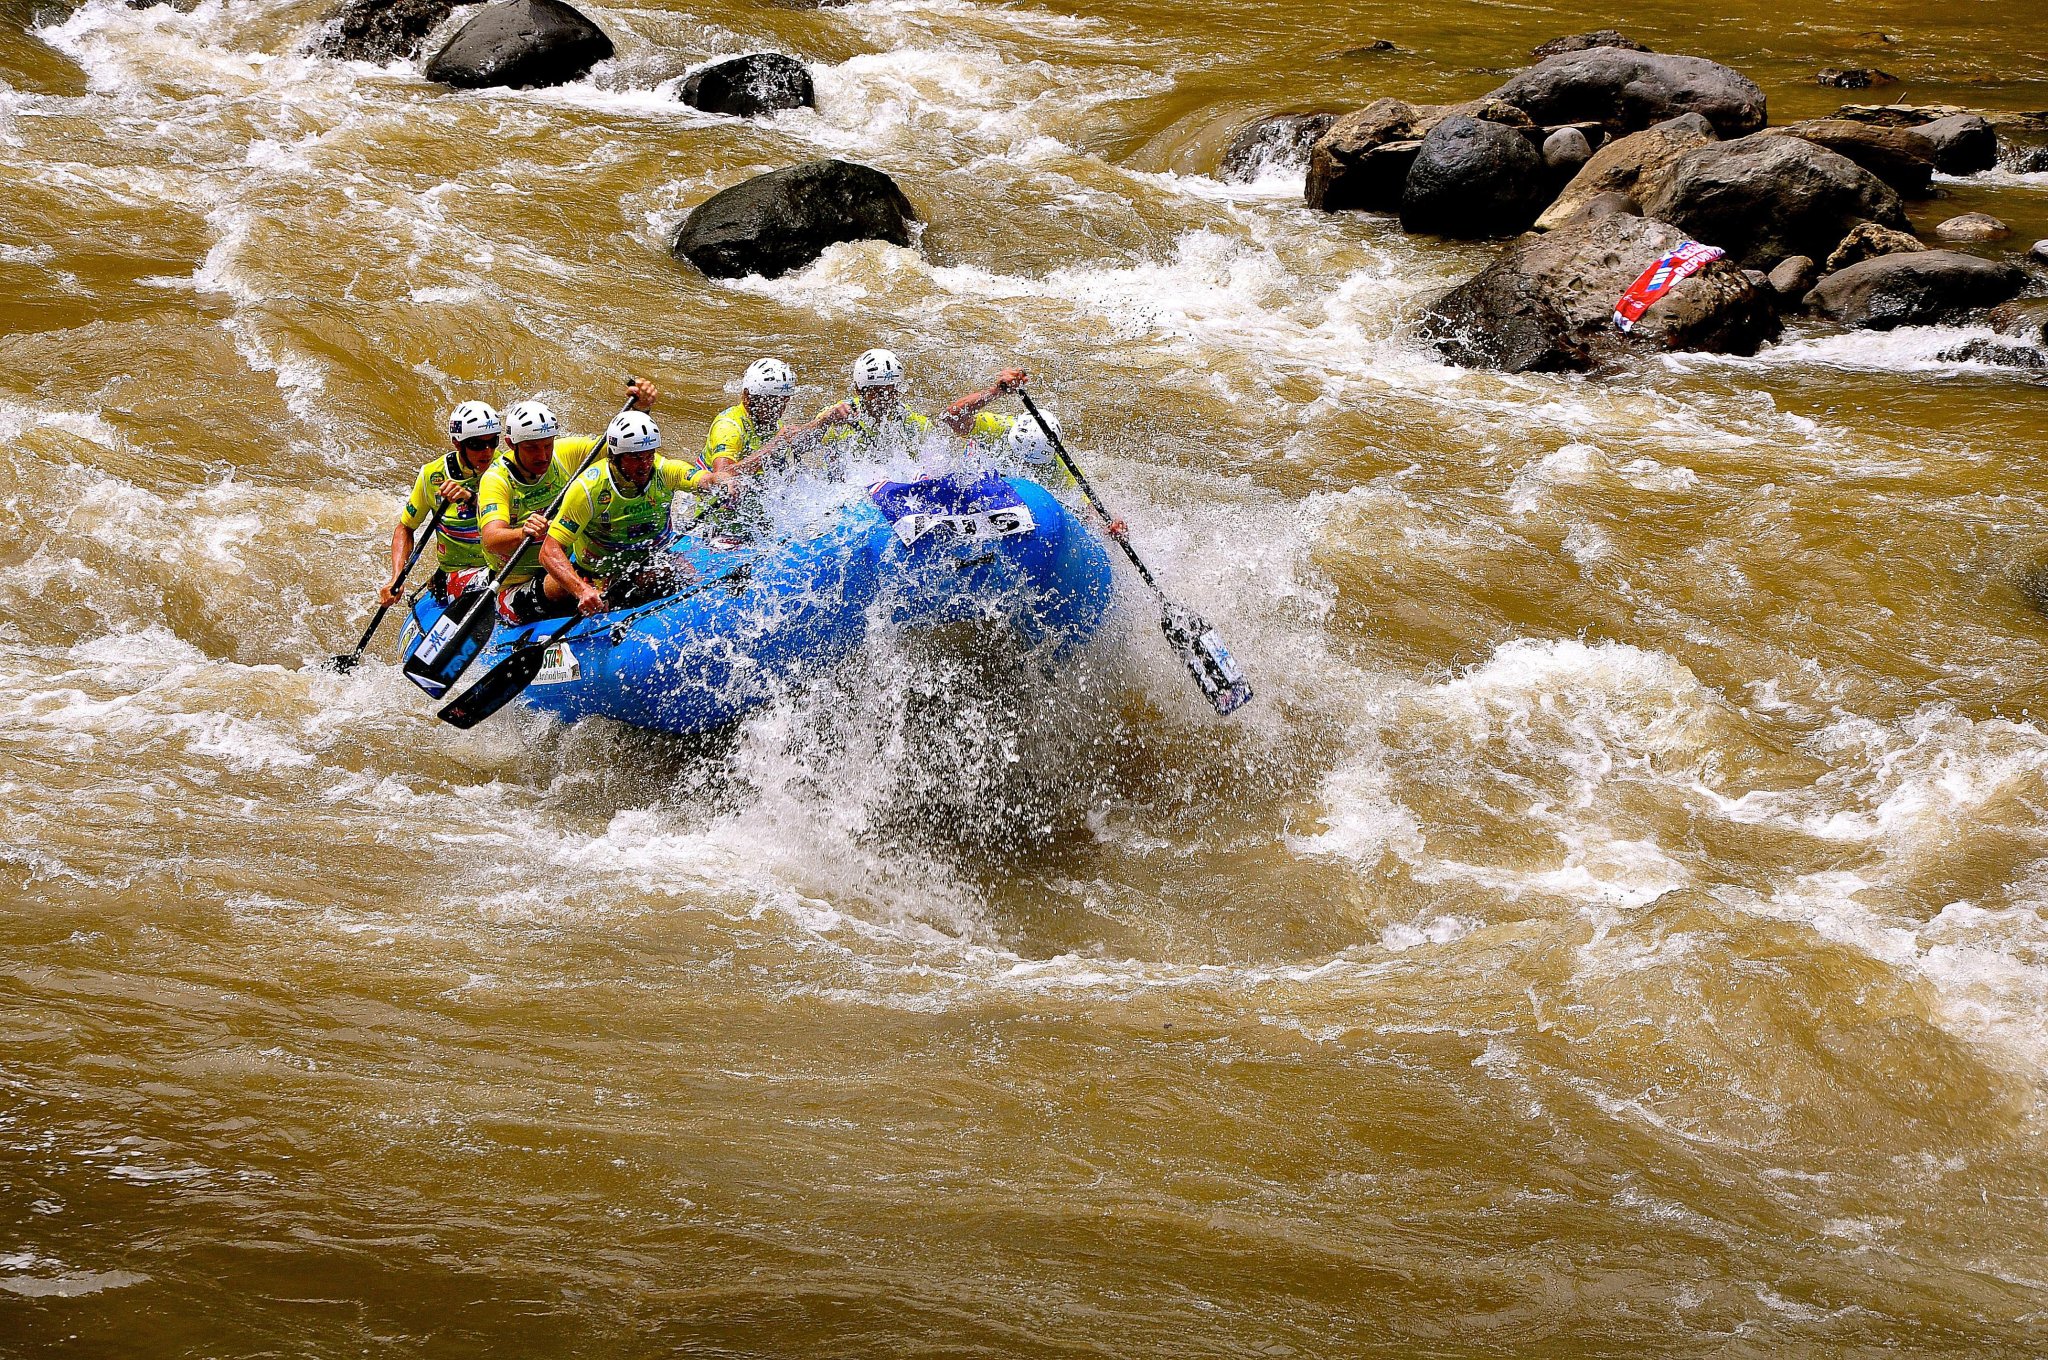 The Best Whitewater Rafting Destinations in the World